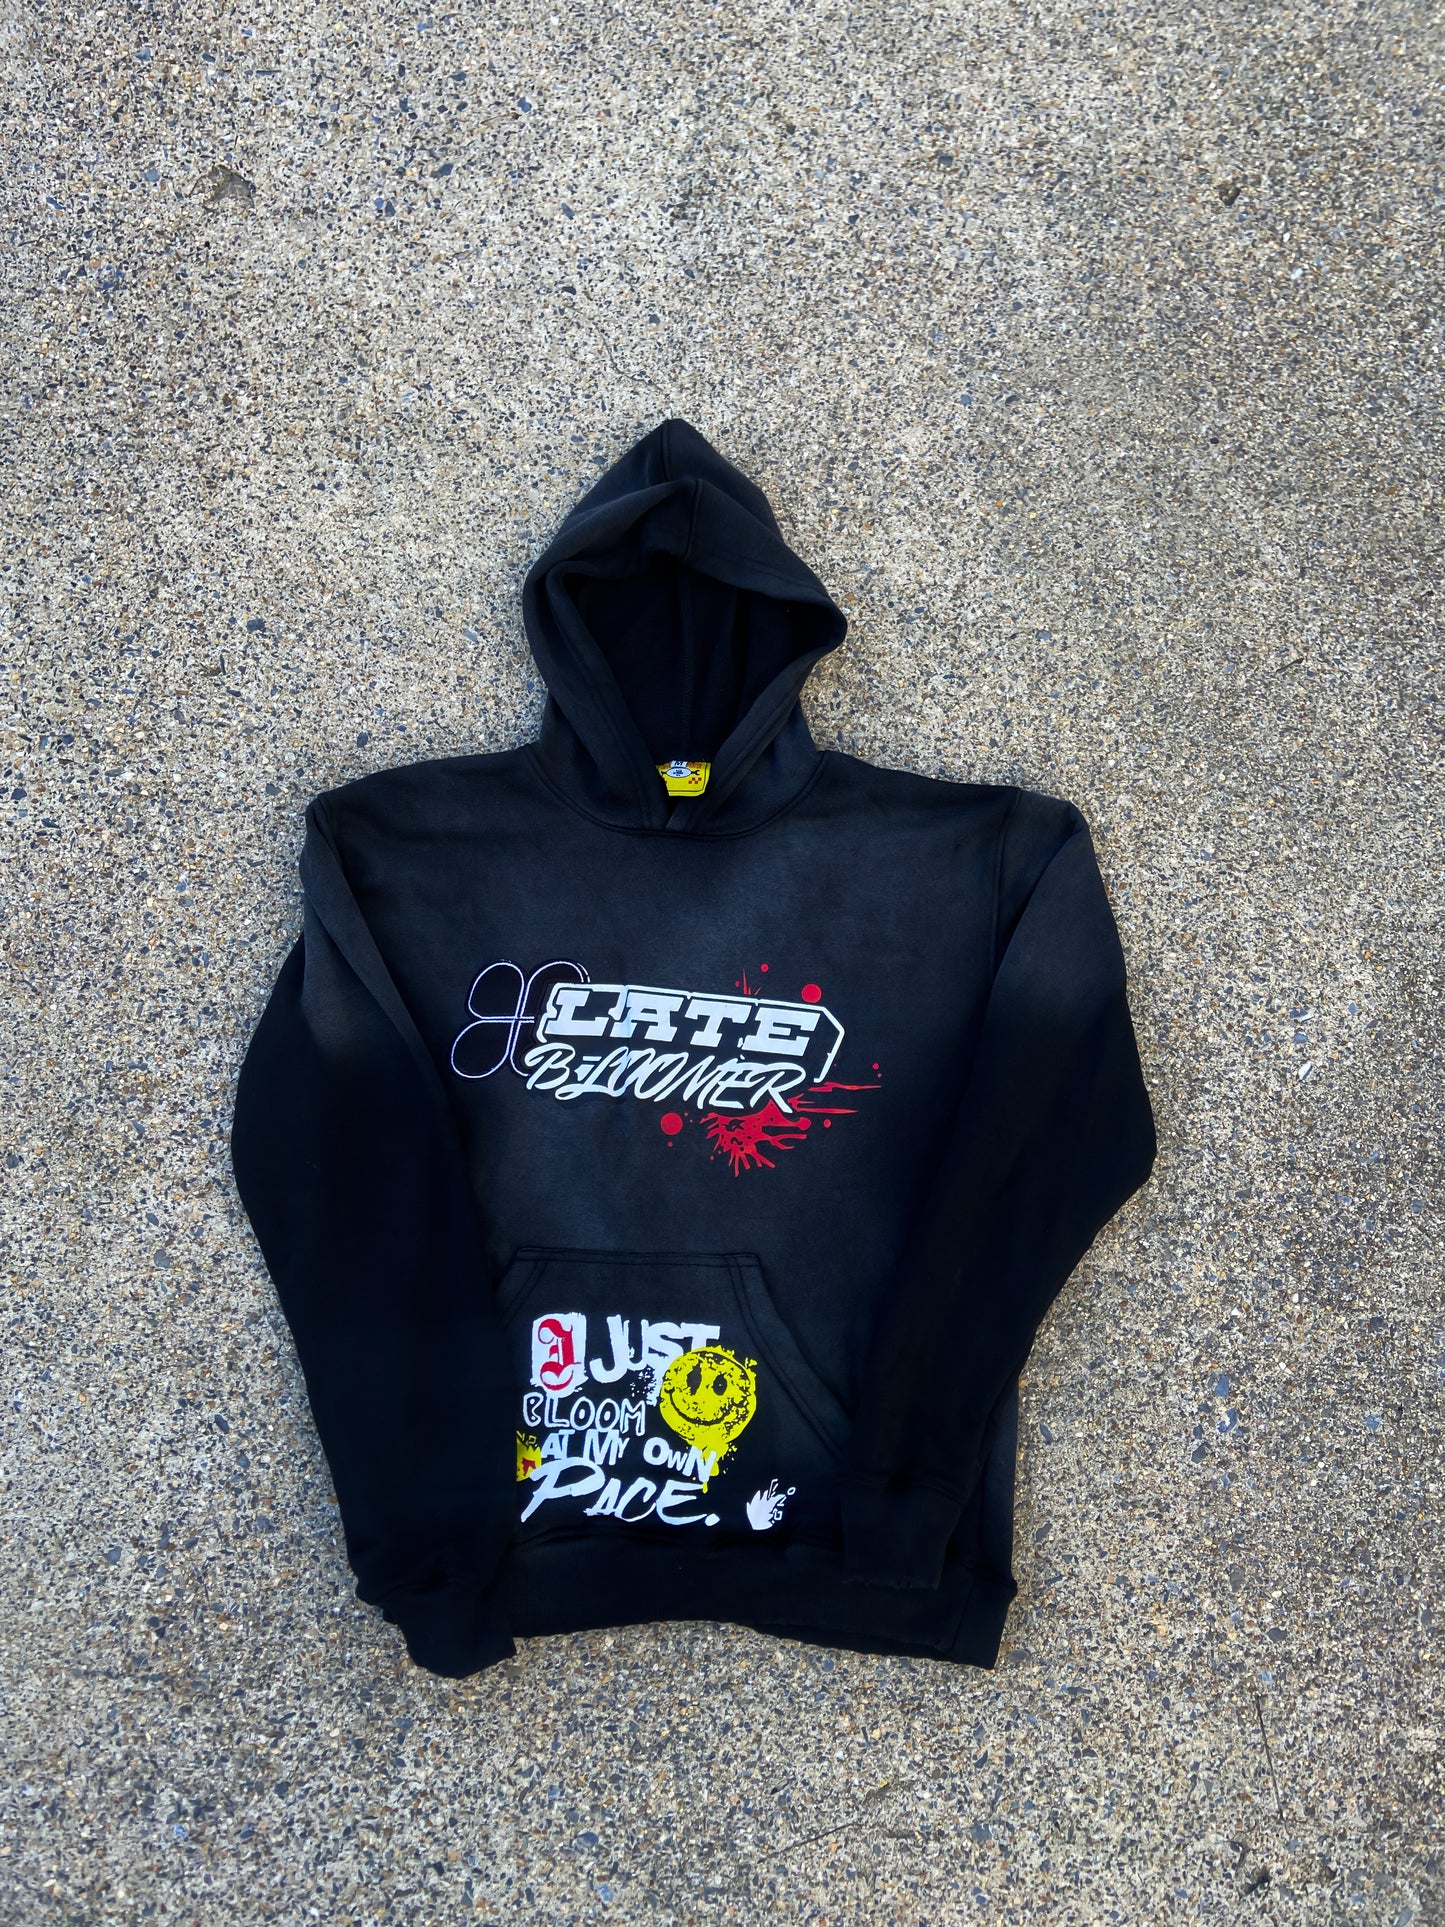 At My Own Pace Hoodie